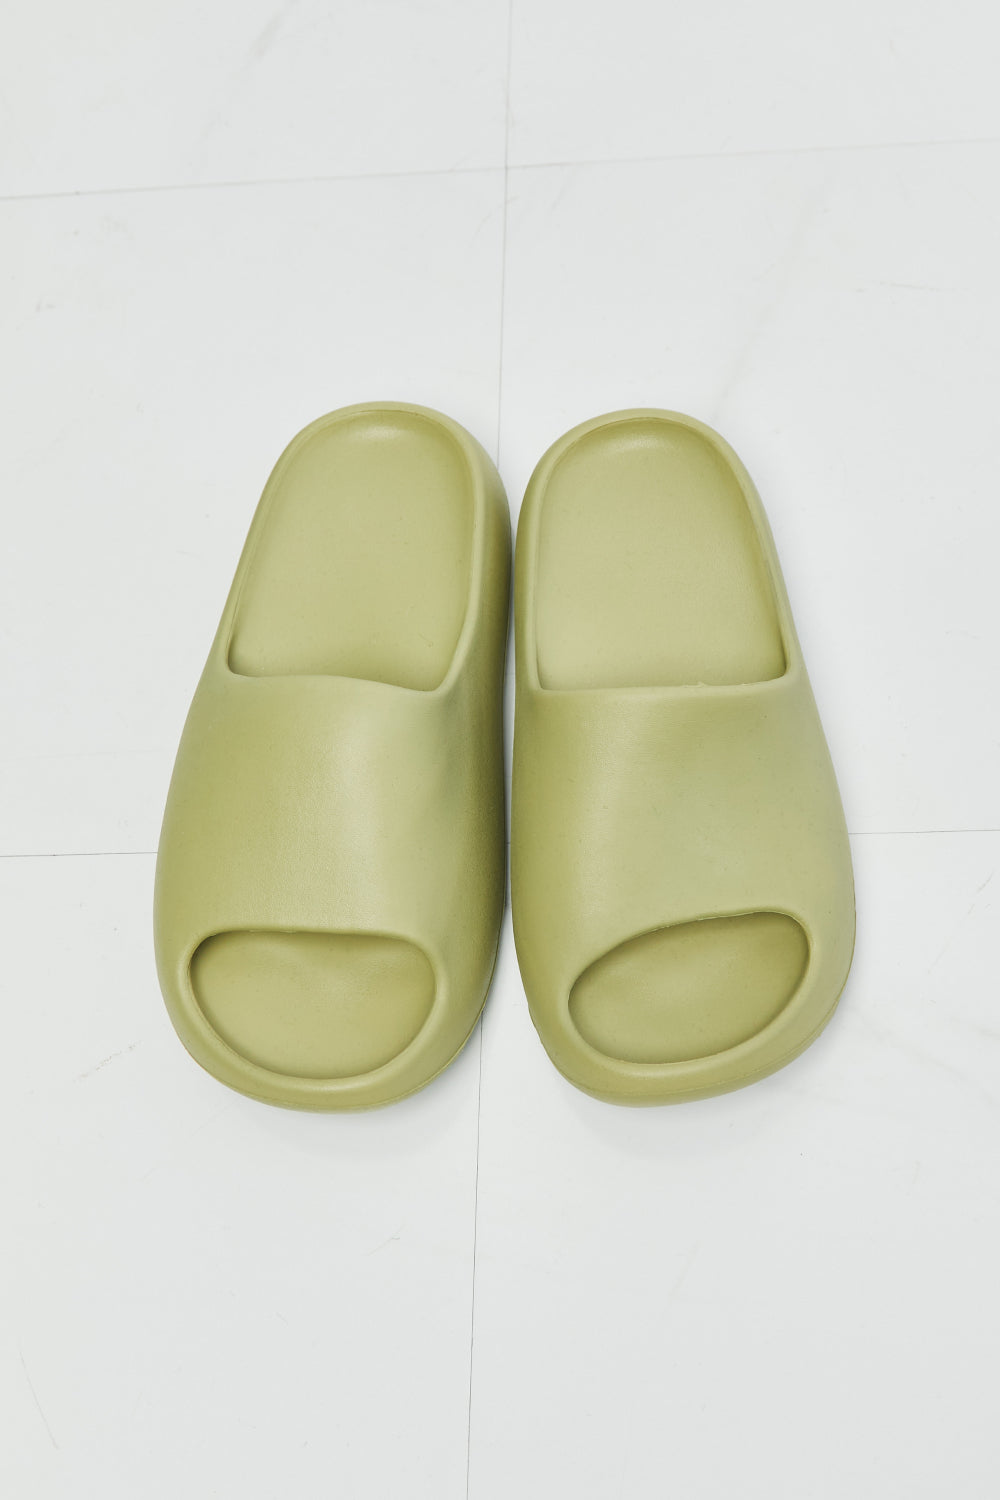 NOOK JOI In My Comfort Zone Slides in Green - BEAUTY COSMOTICS SHOP